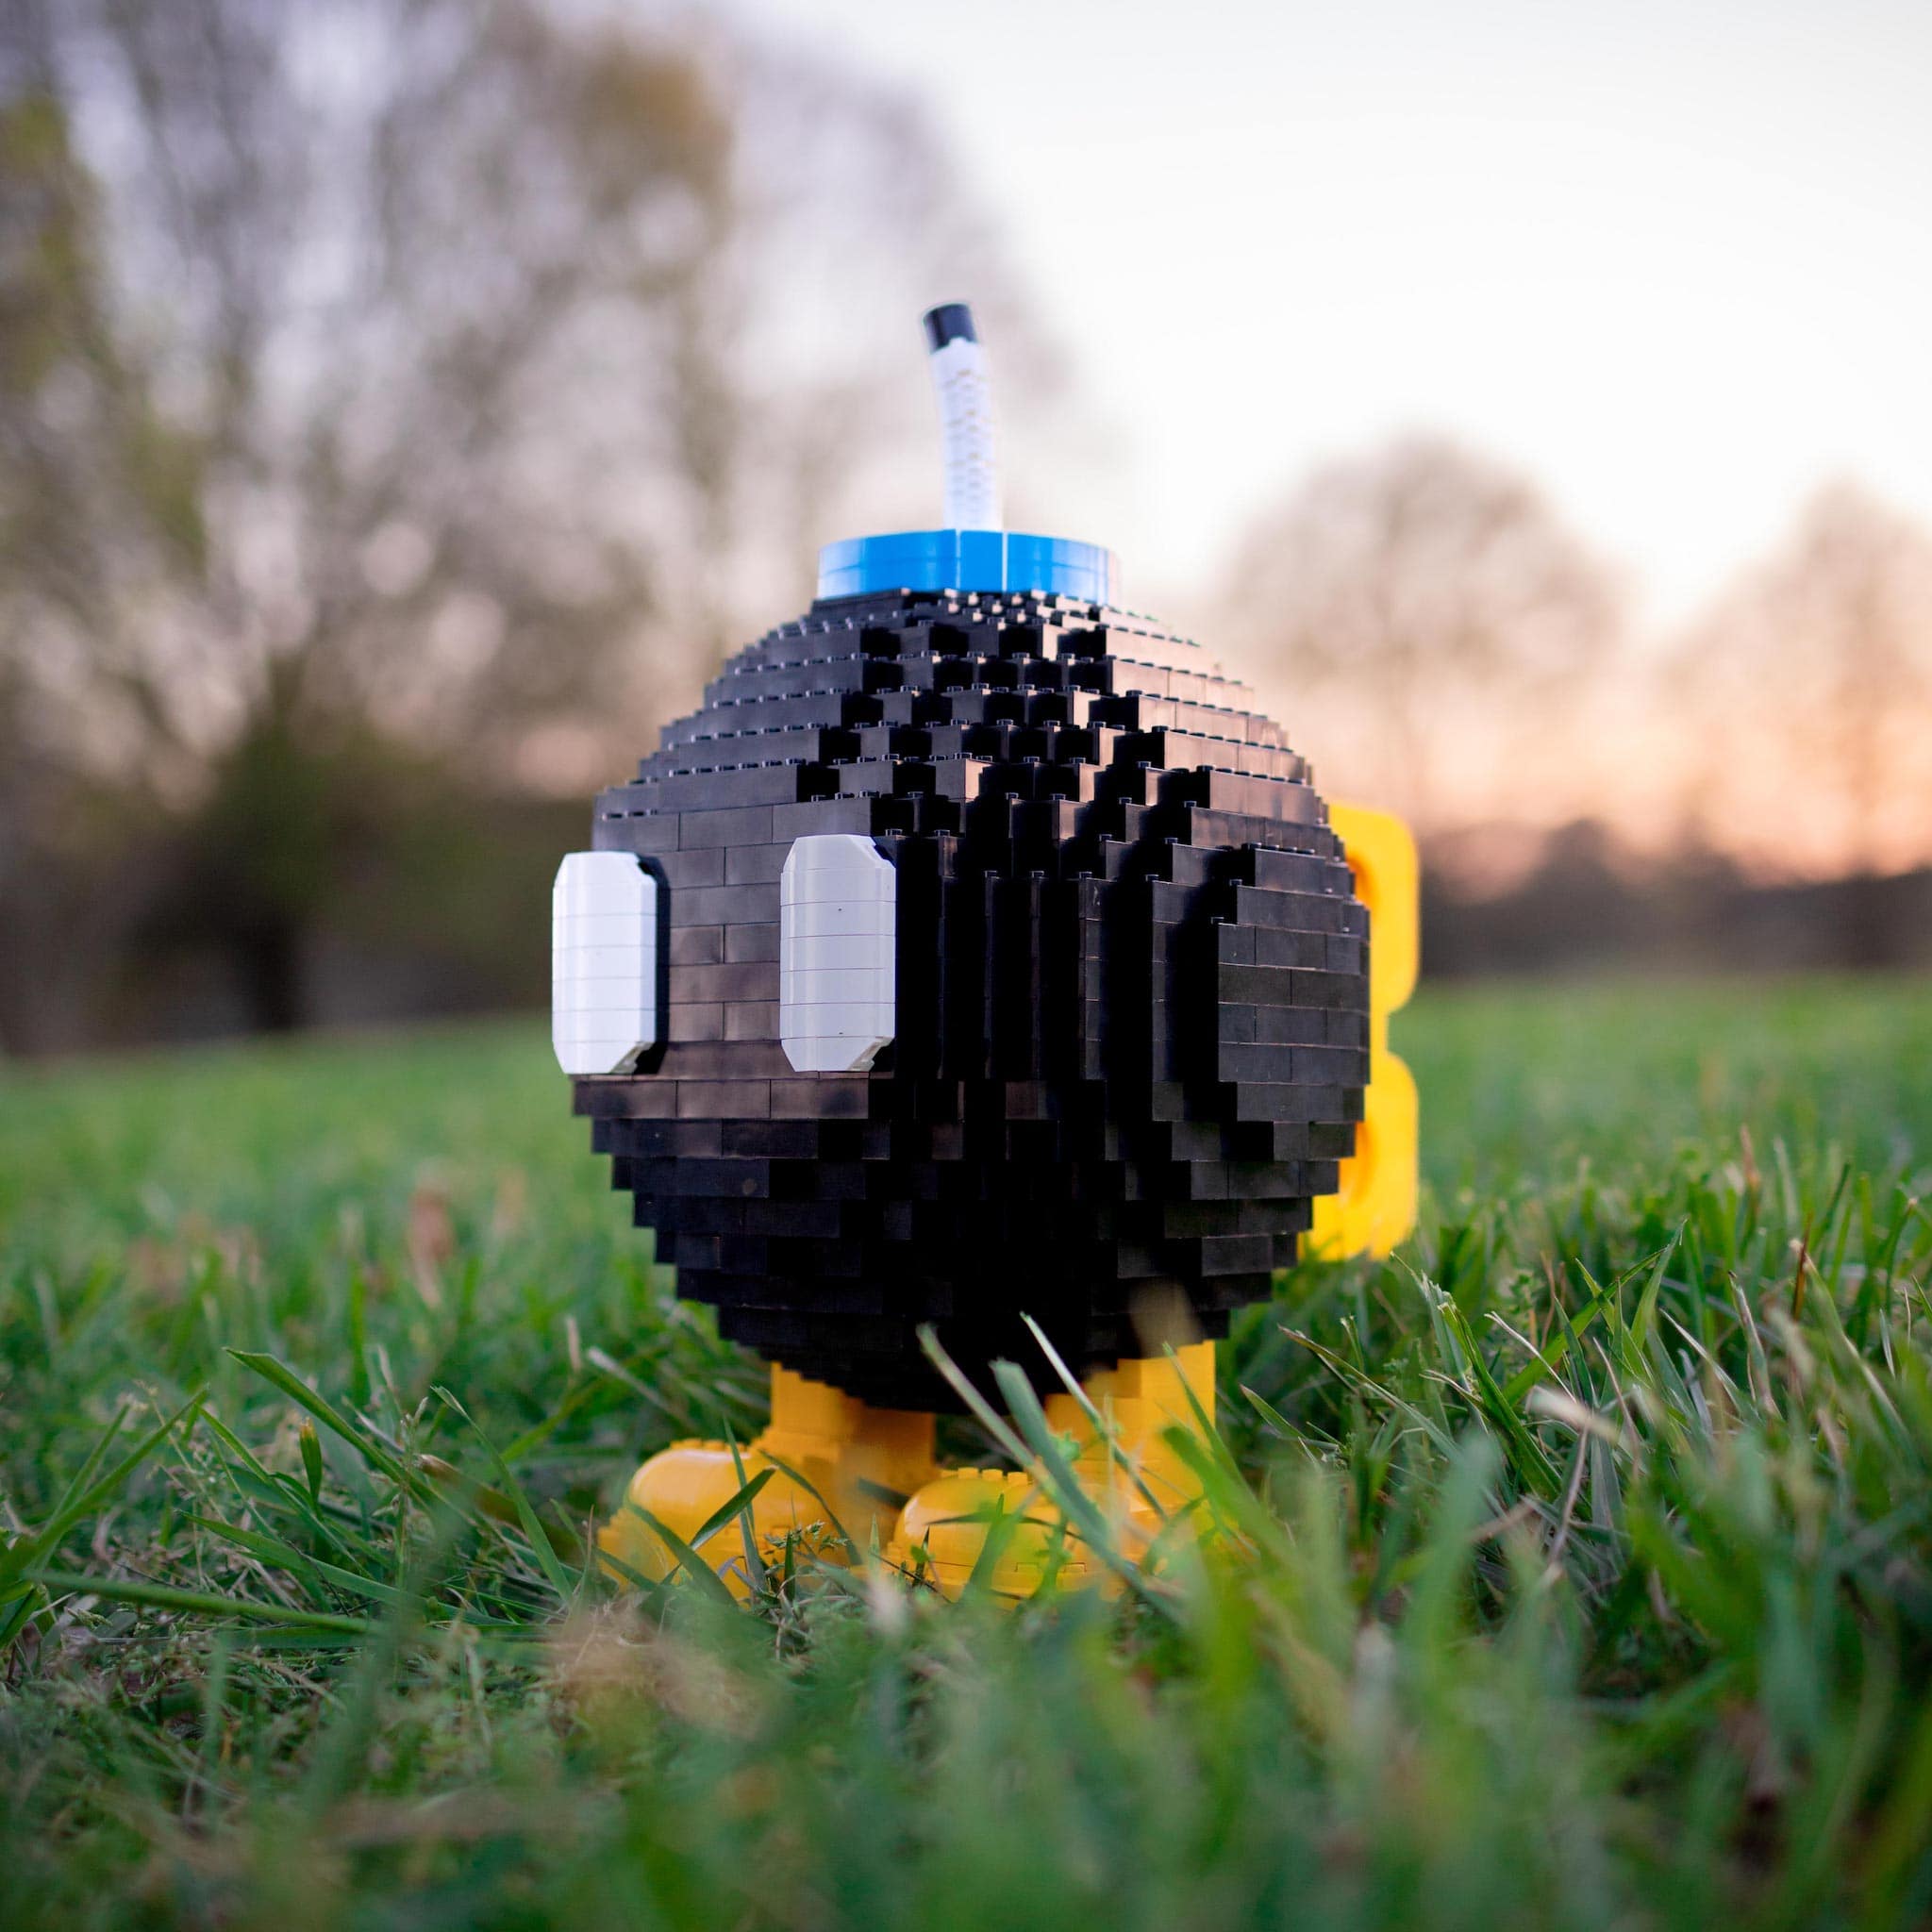 Angry Bomb Life-Sized Replica